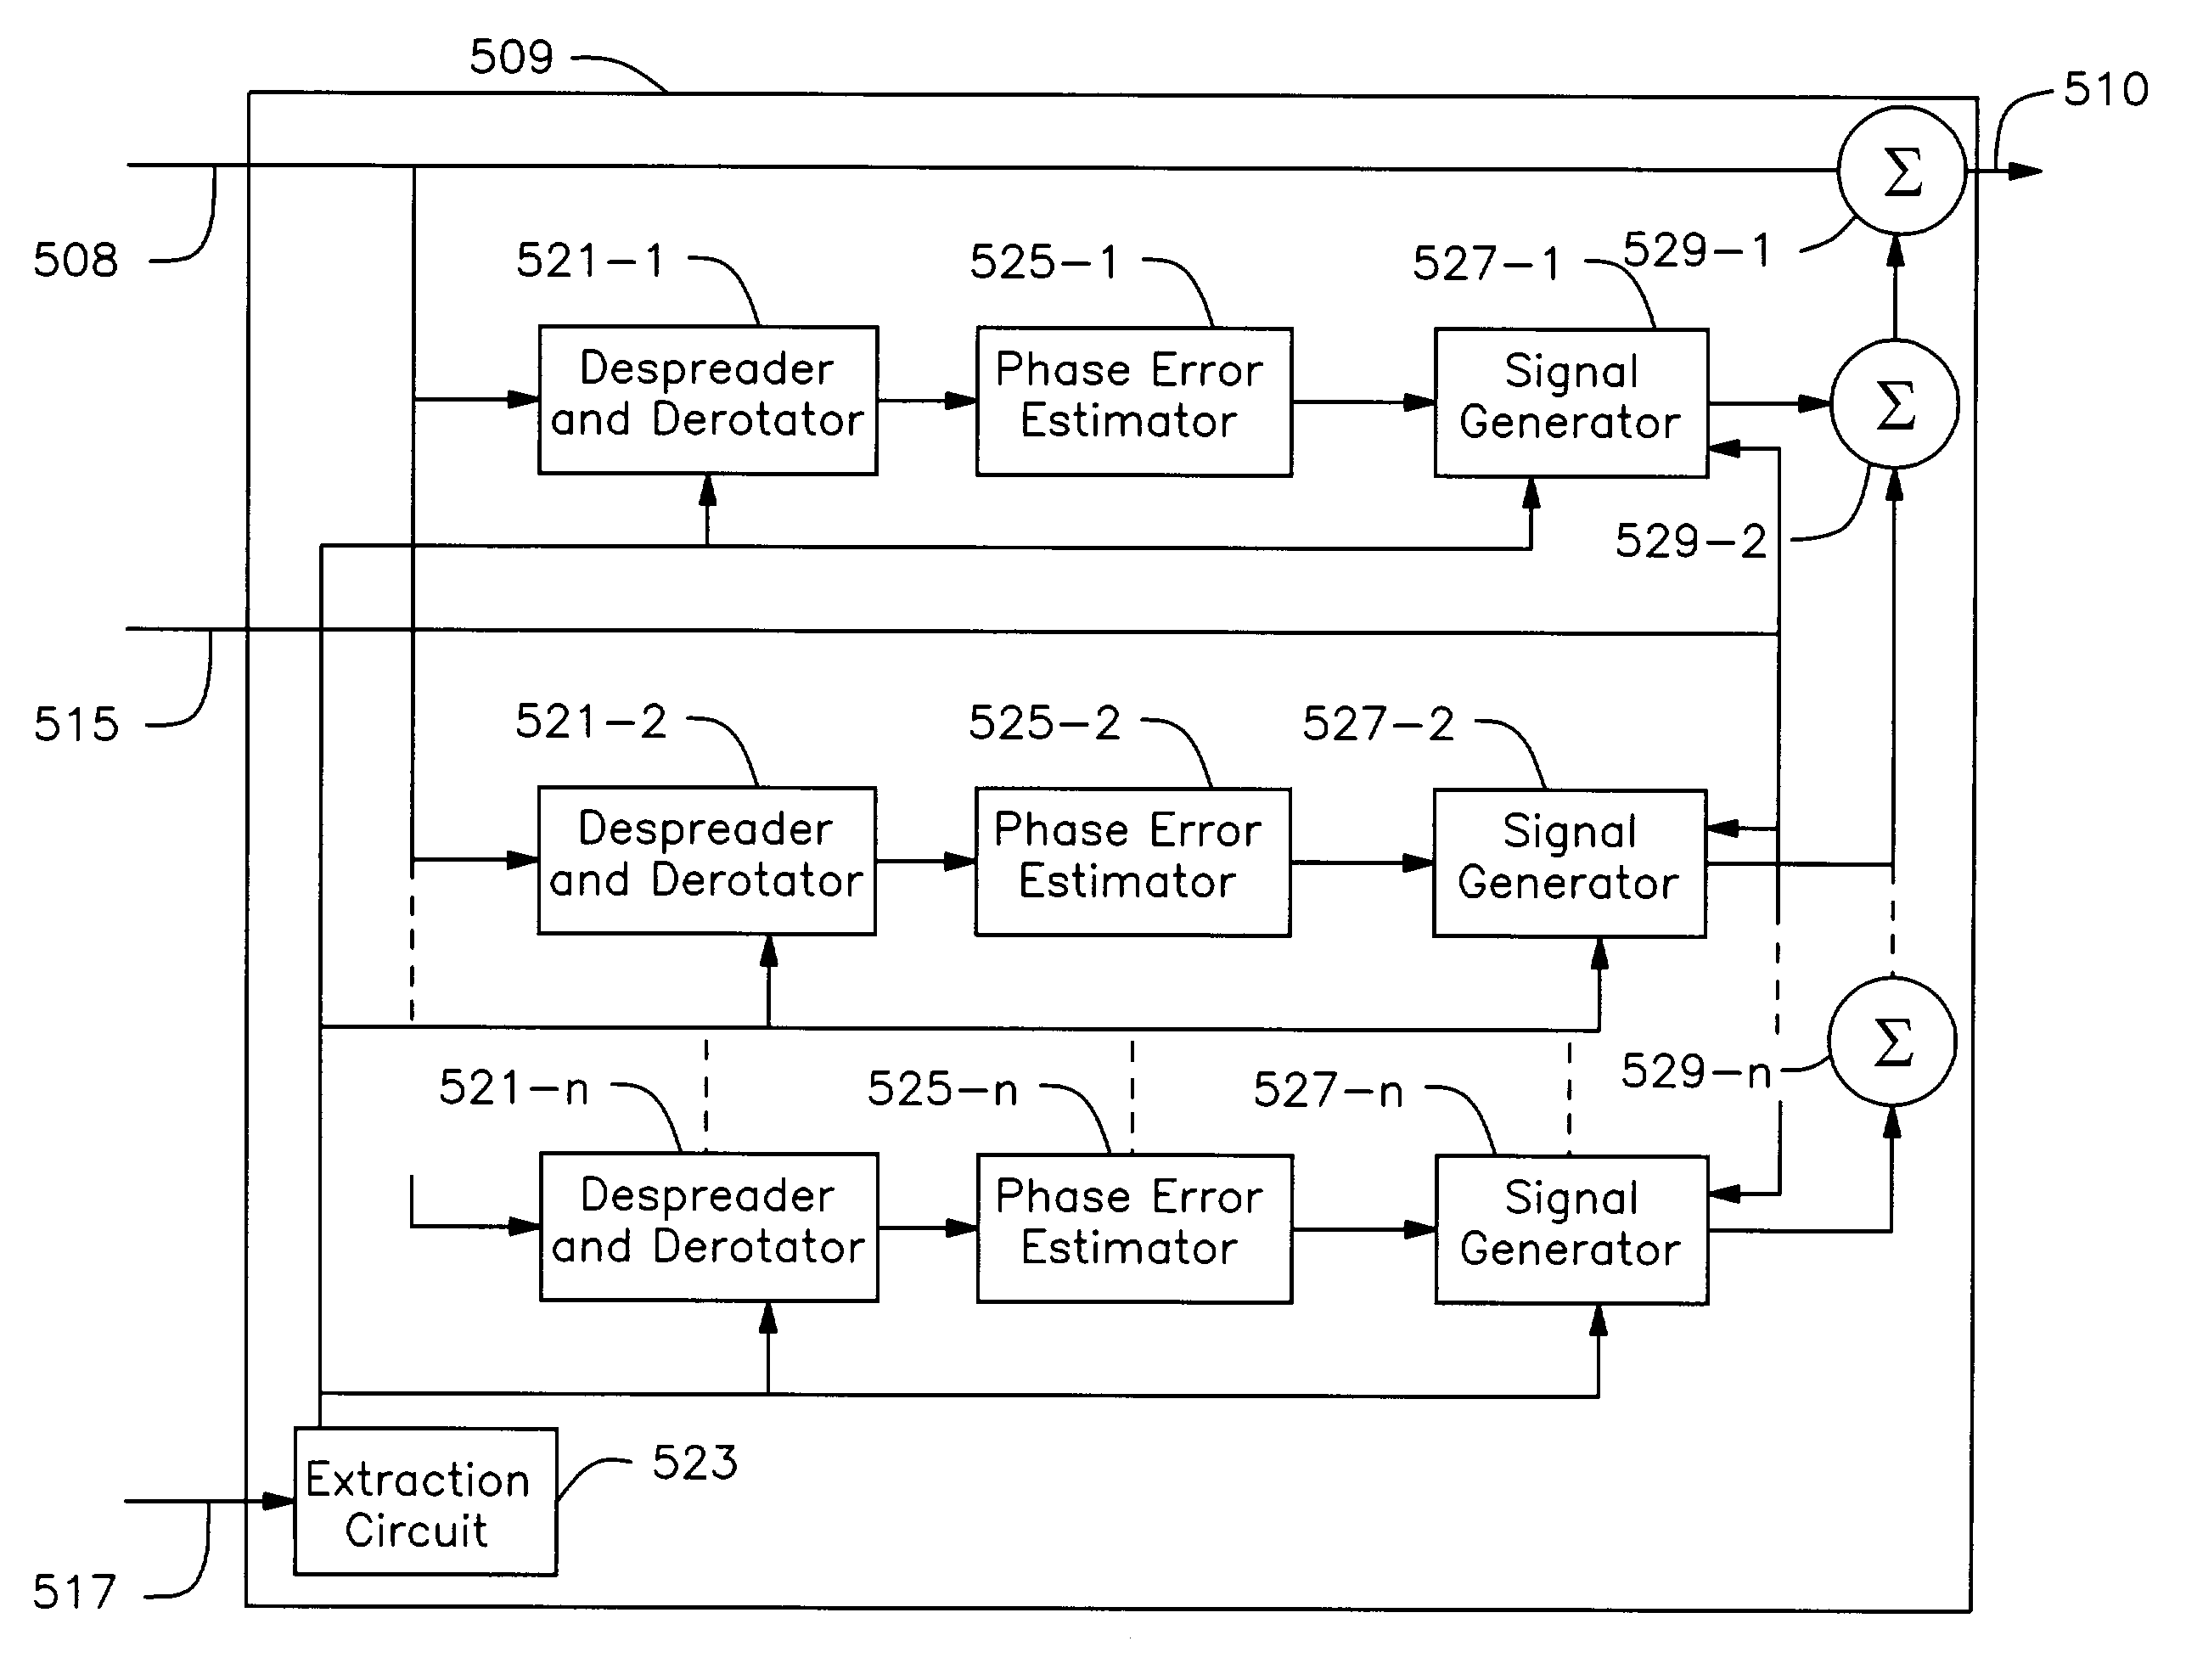 External correction of errors between traffic and training in a wireless communications system